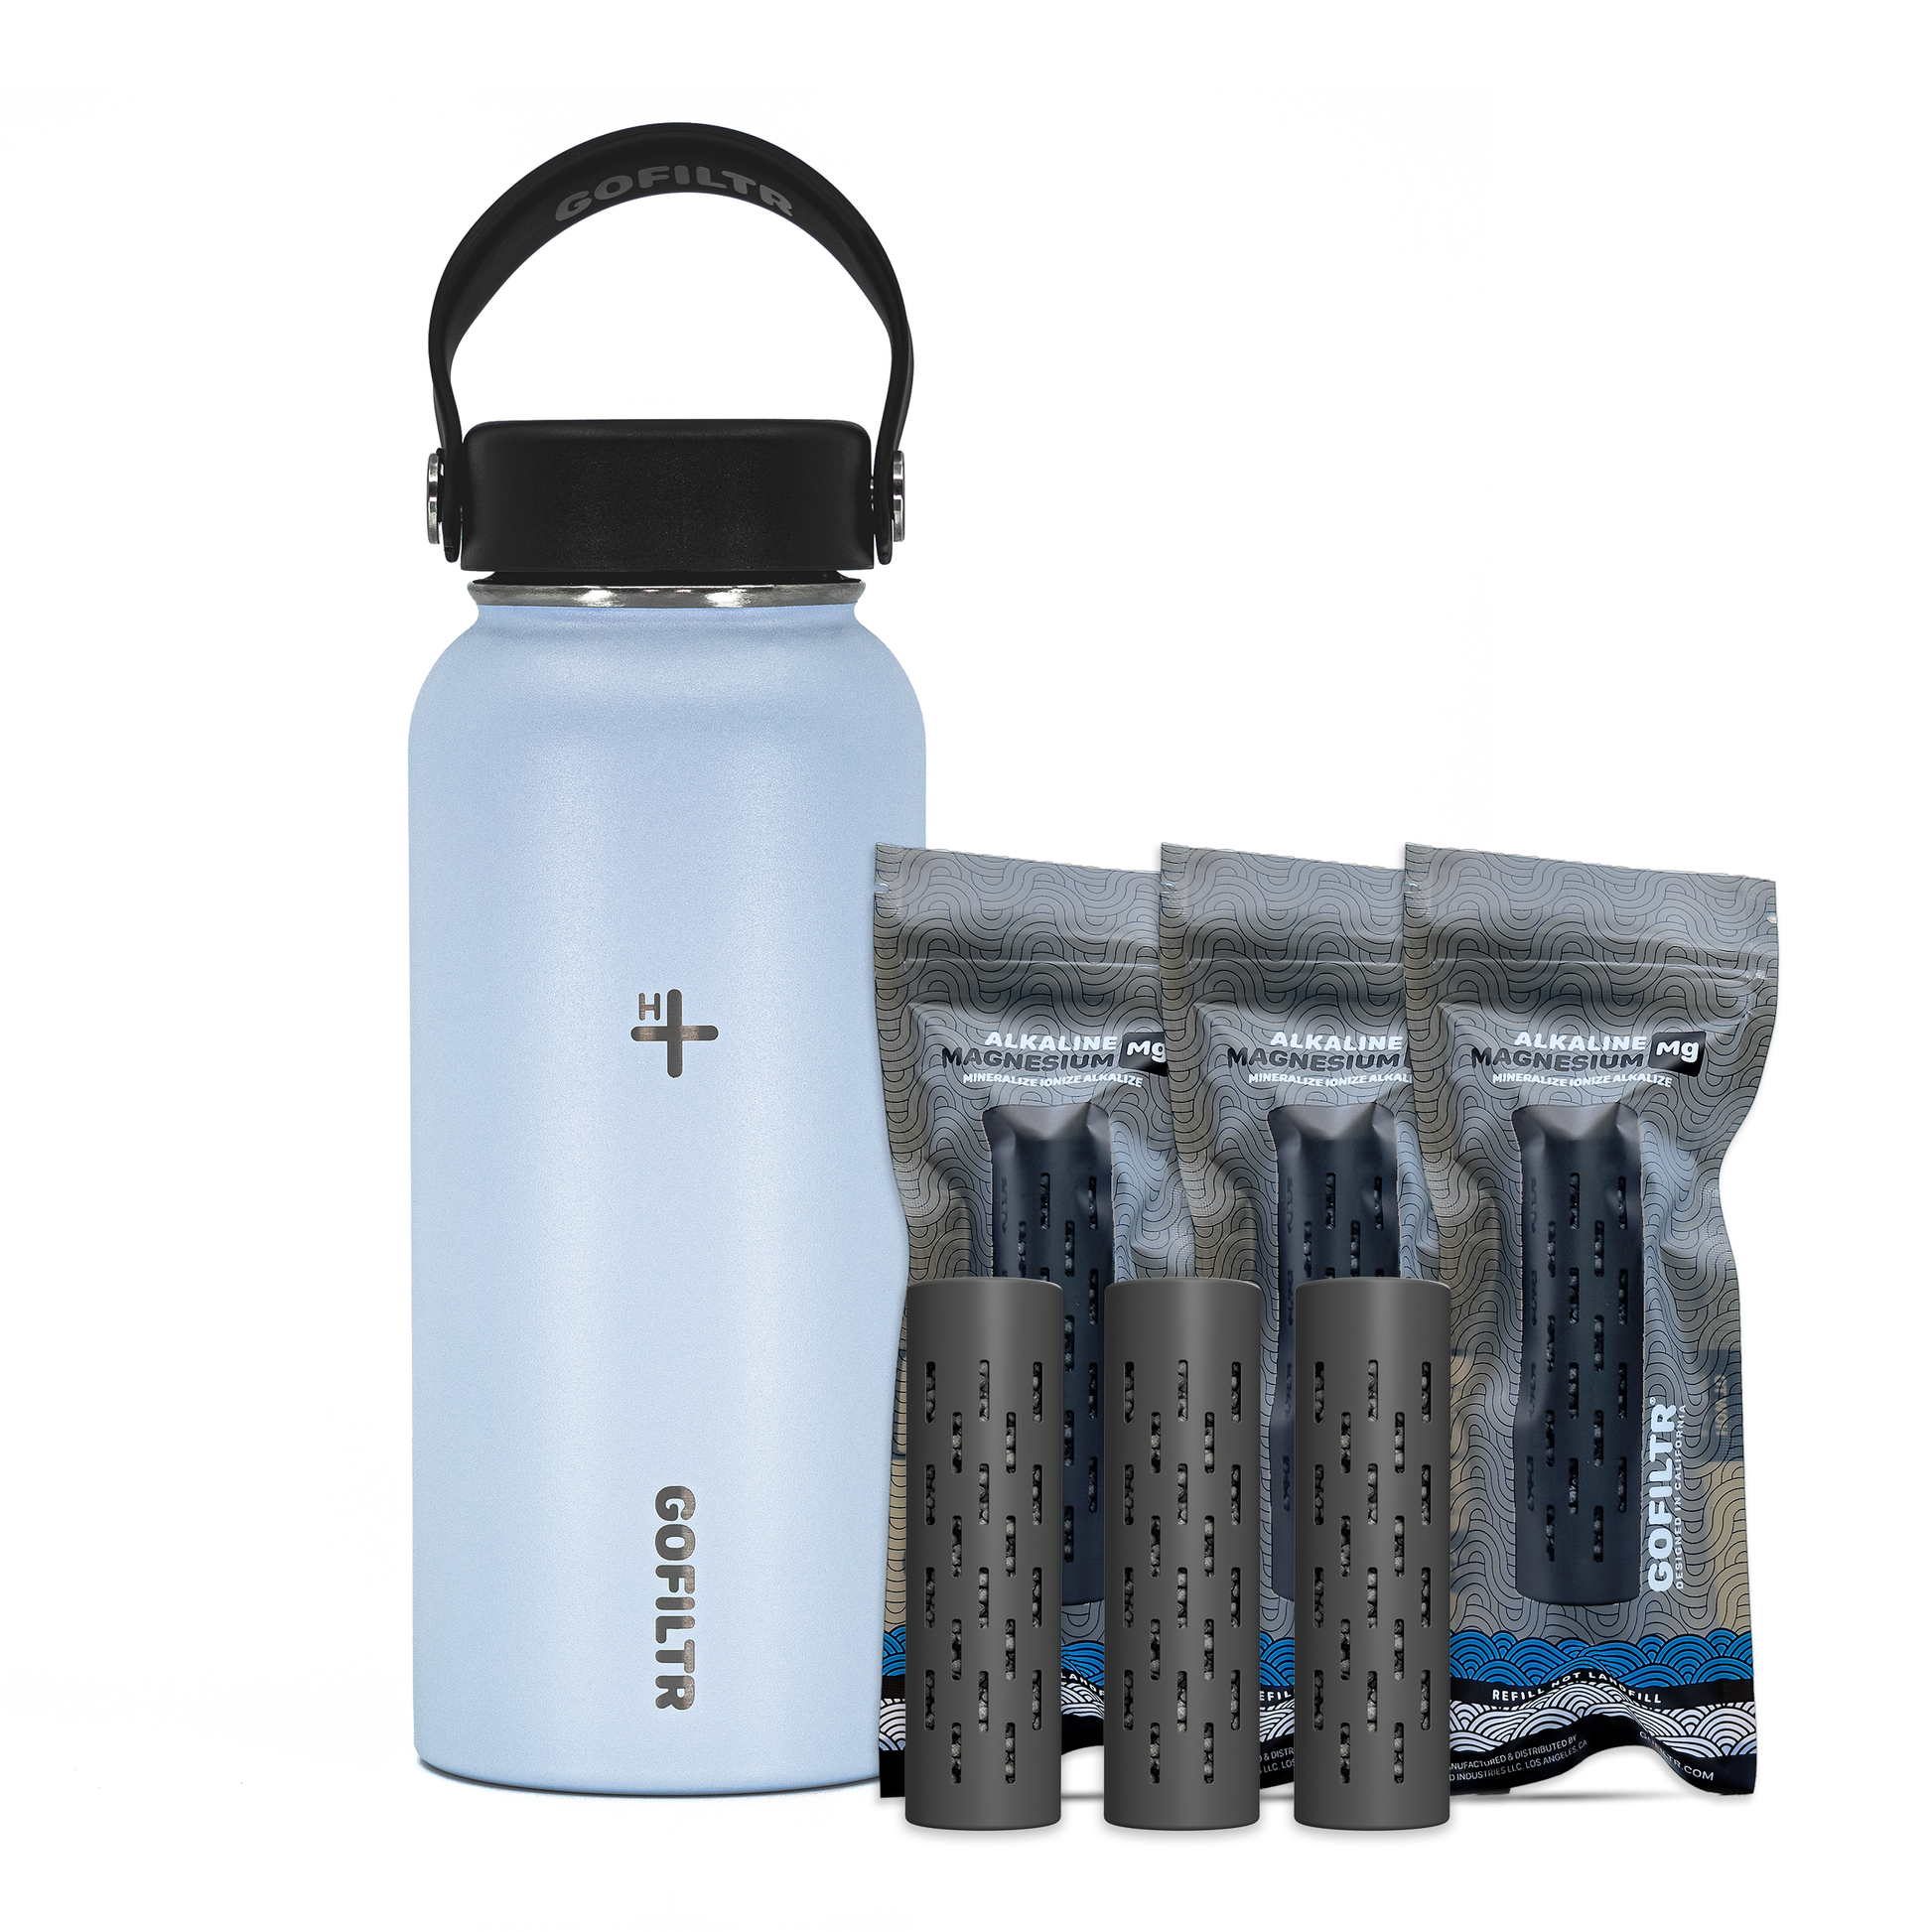 3 Gallon Glass Bottle Premium Alkaline water 8.5 - 9.5 pH enhanced with a  hint of minerals